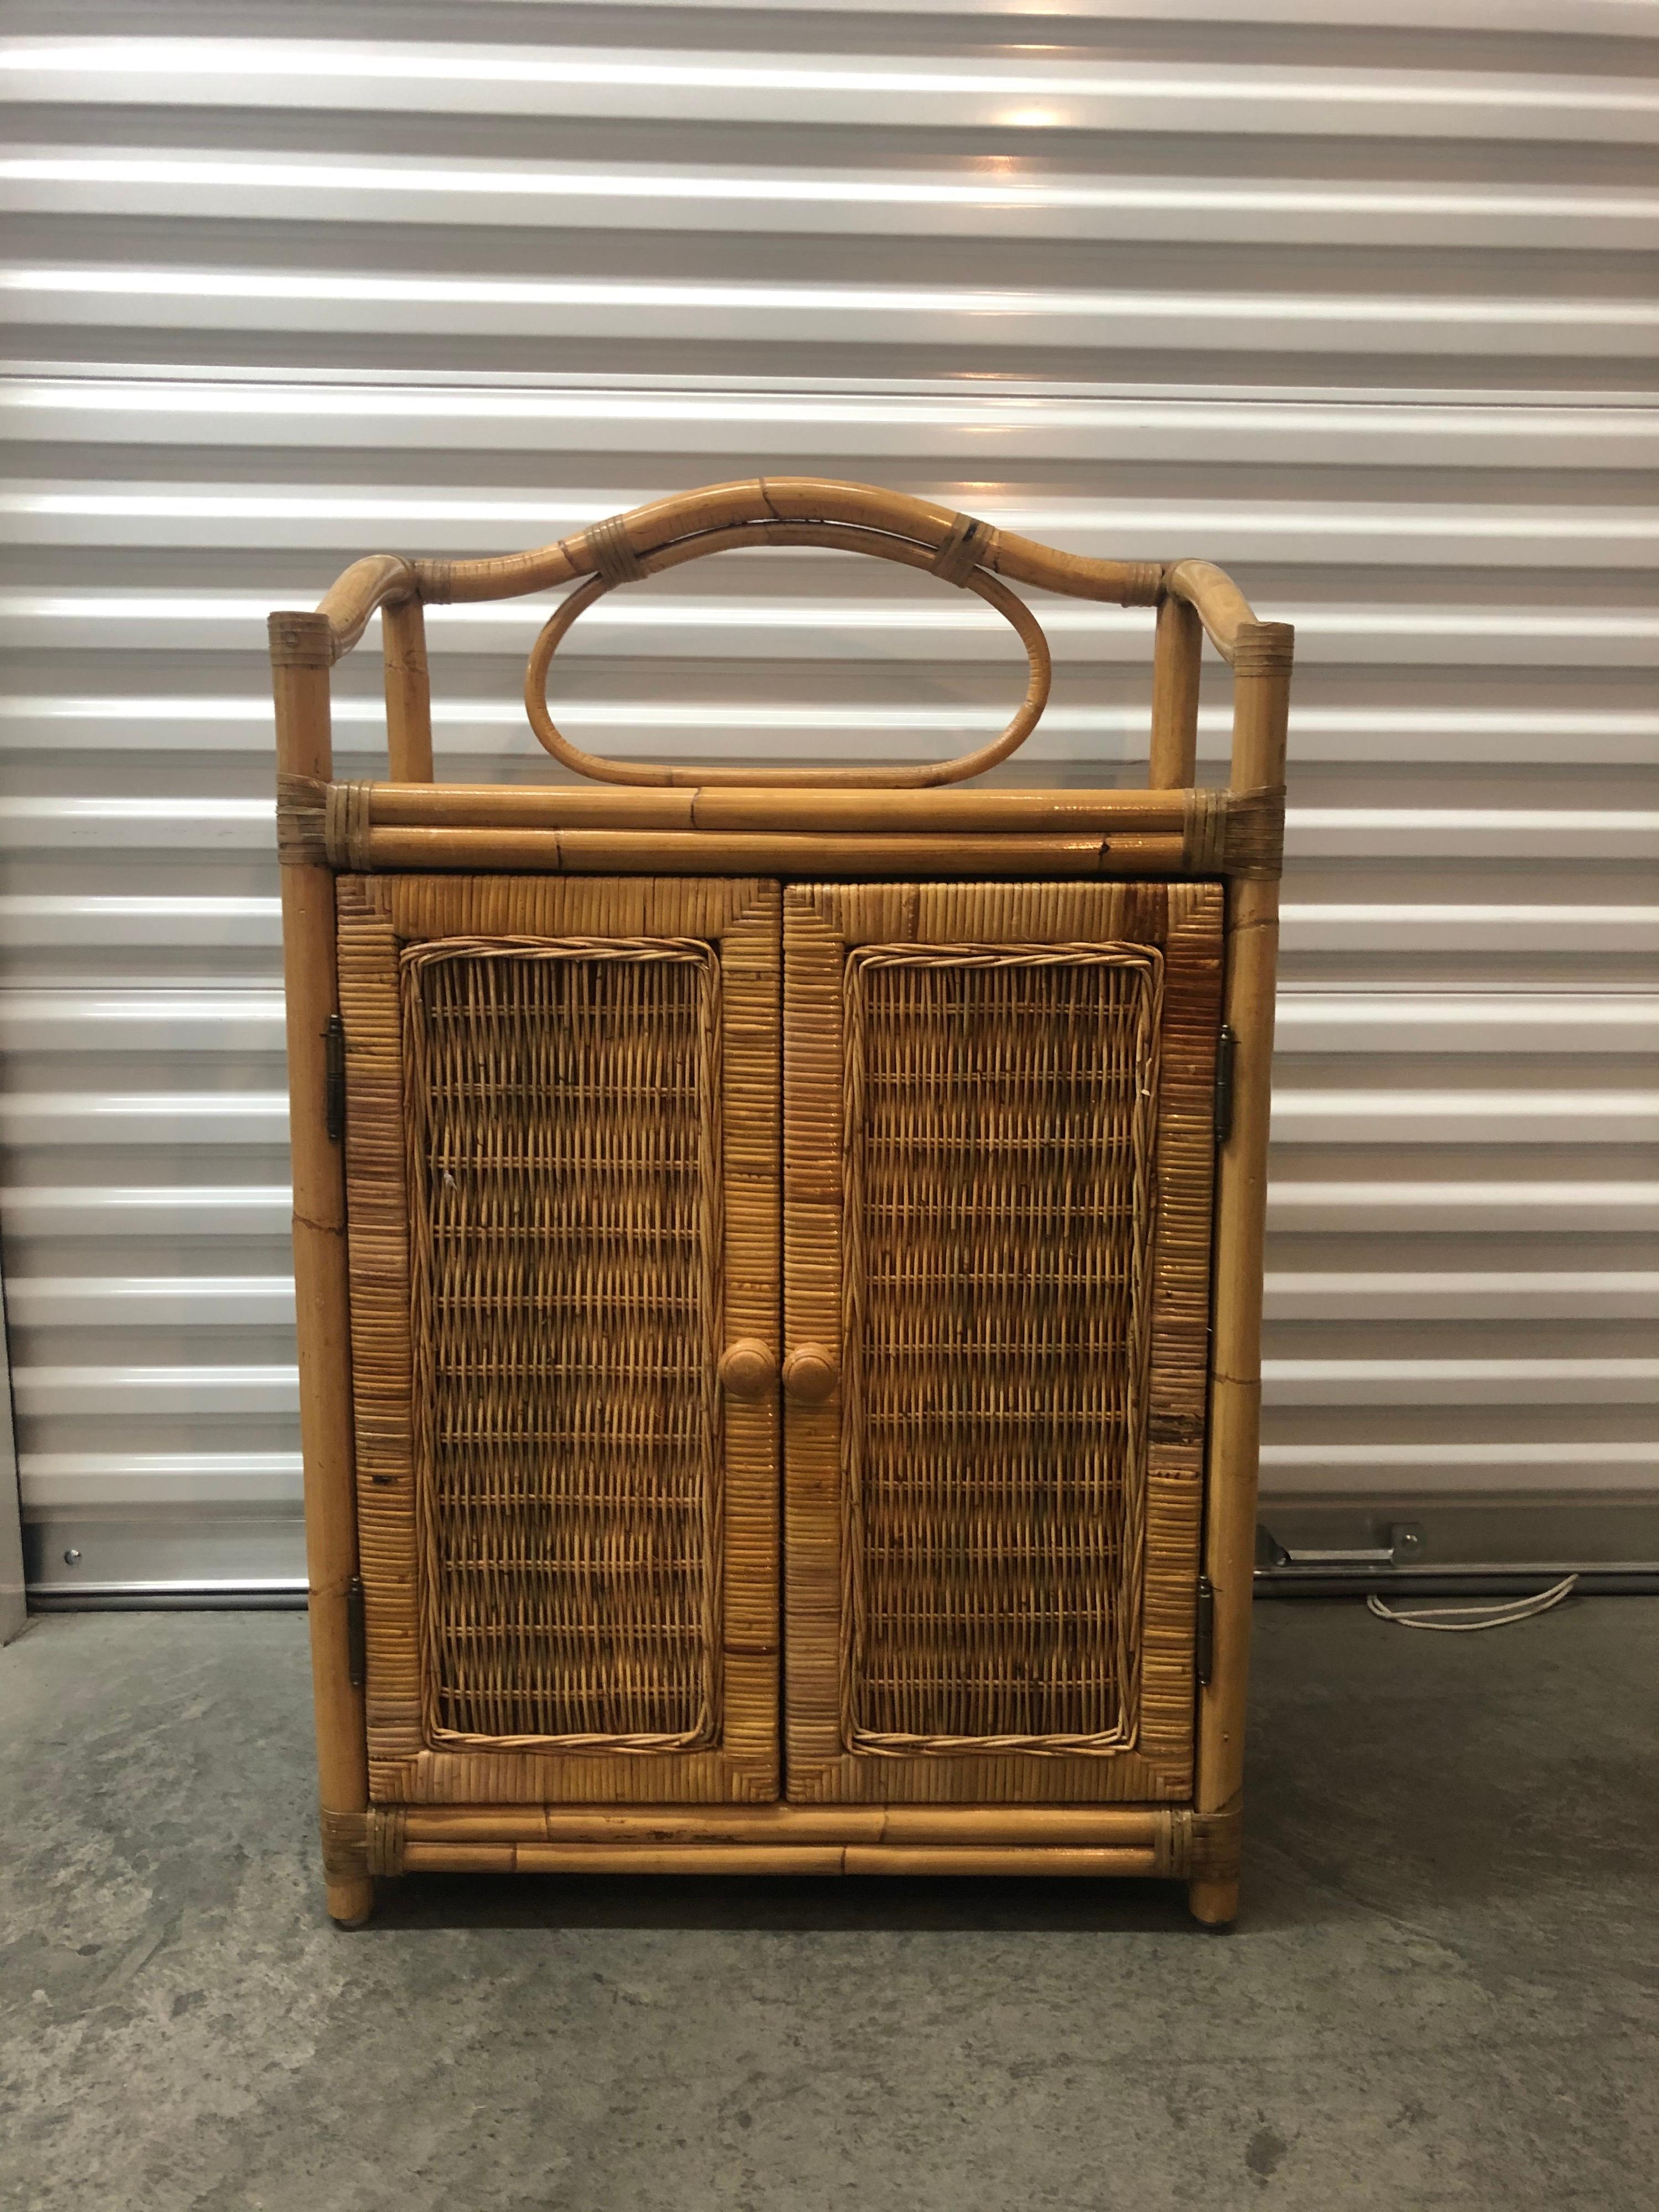 Vintage two-door bamboo and rattan bar cabinet.
Woven wicker details on sides and doors, wood knobs.
Two shelves inside. Finished with a nice bent bamboo top.
Size: 24. 1/4